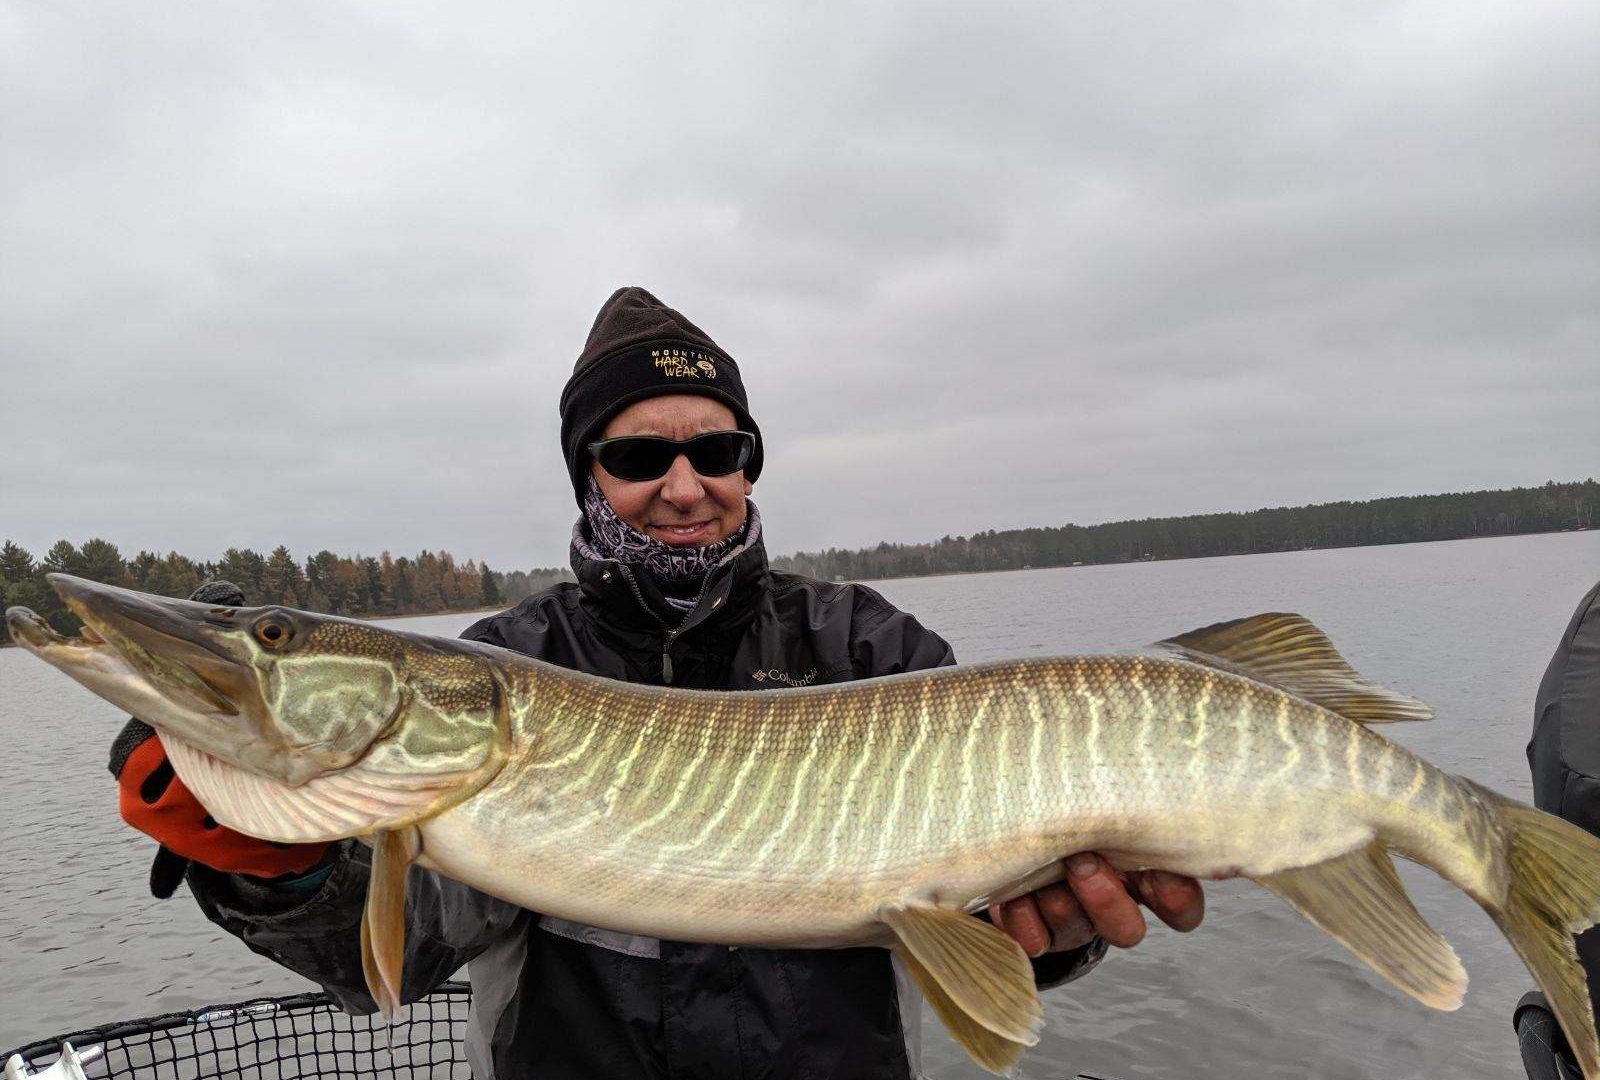 Person holding a large fish on a lake.